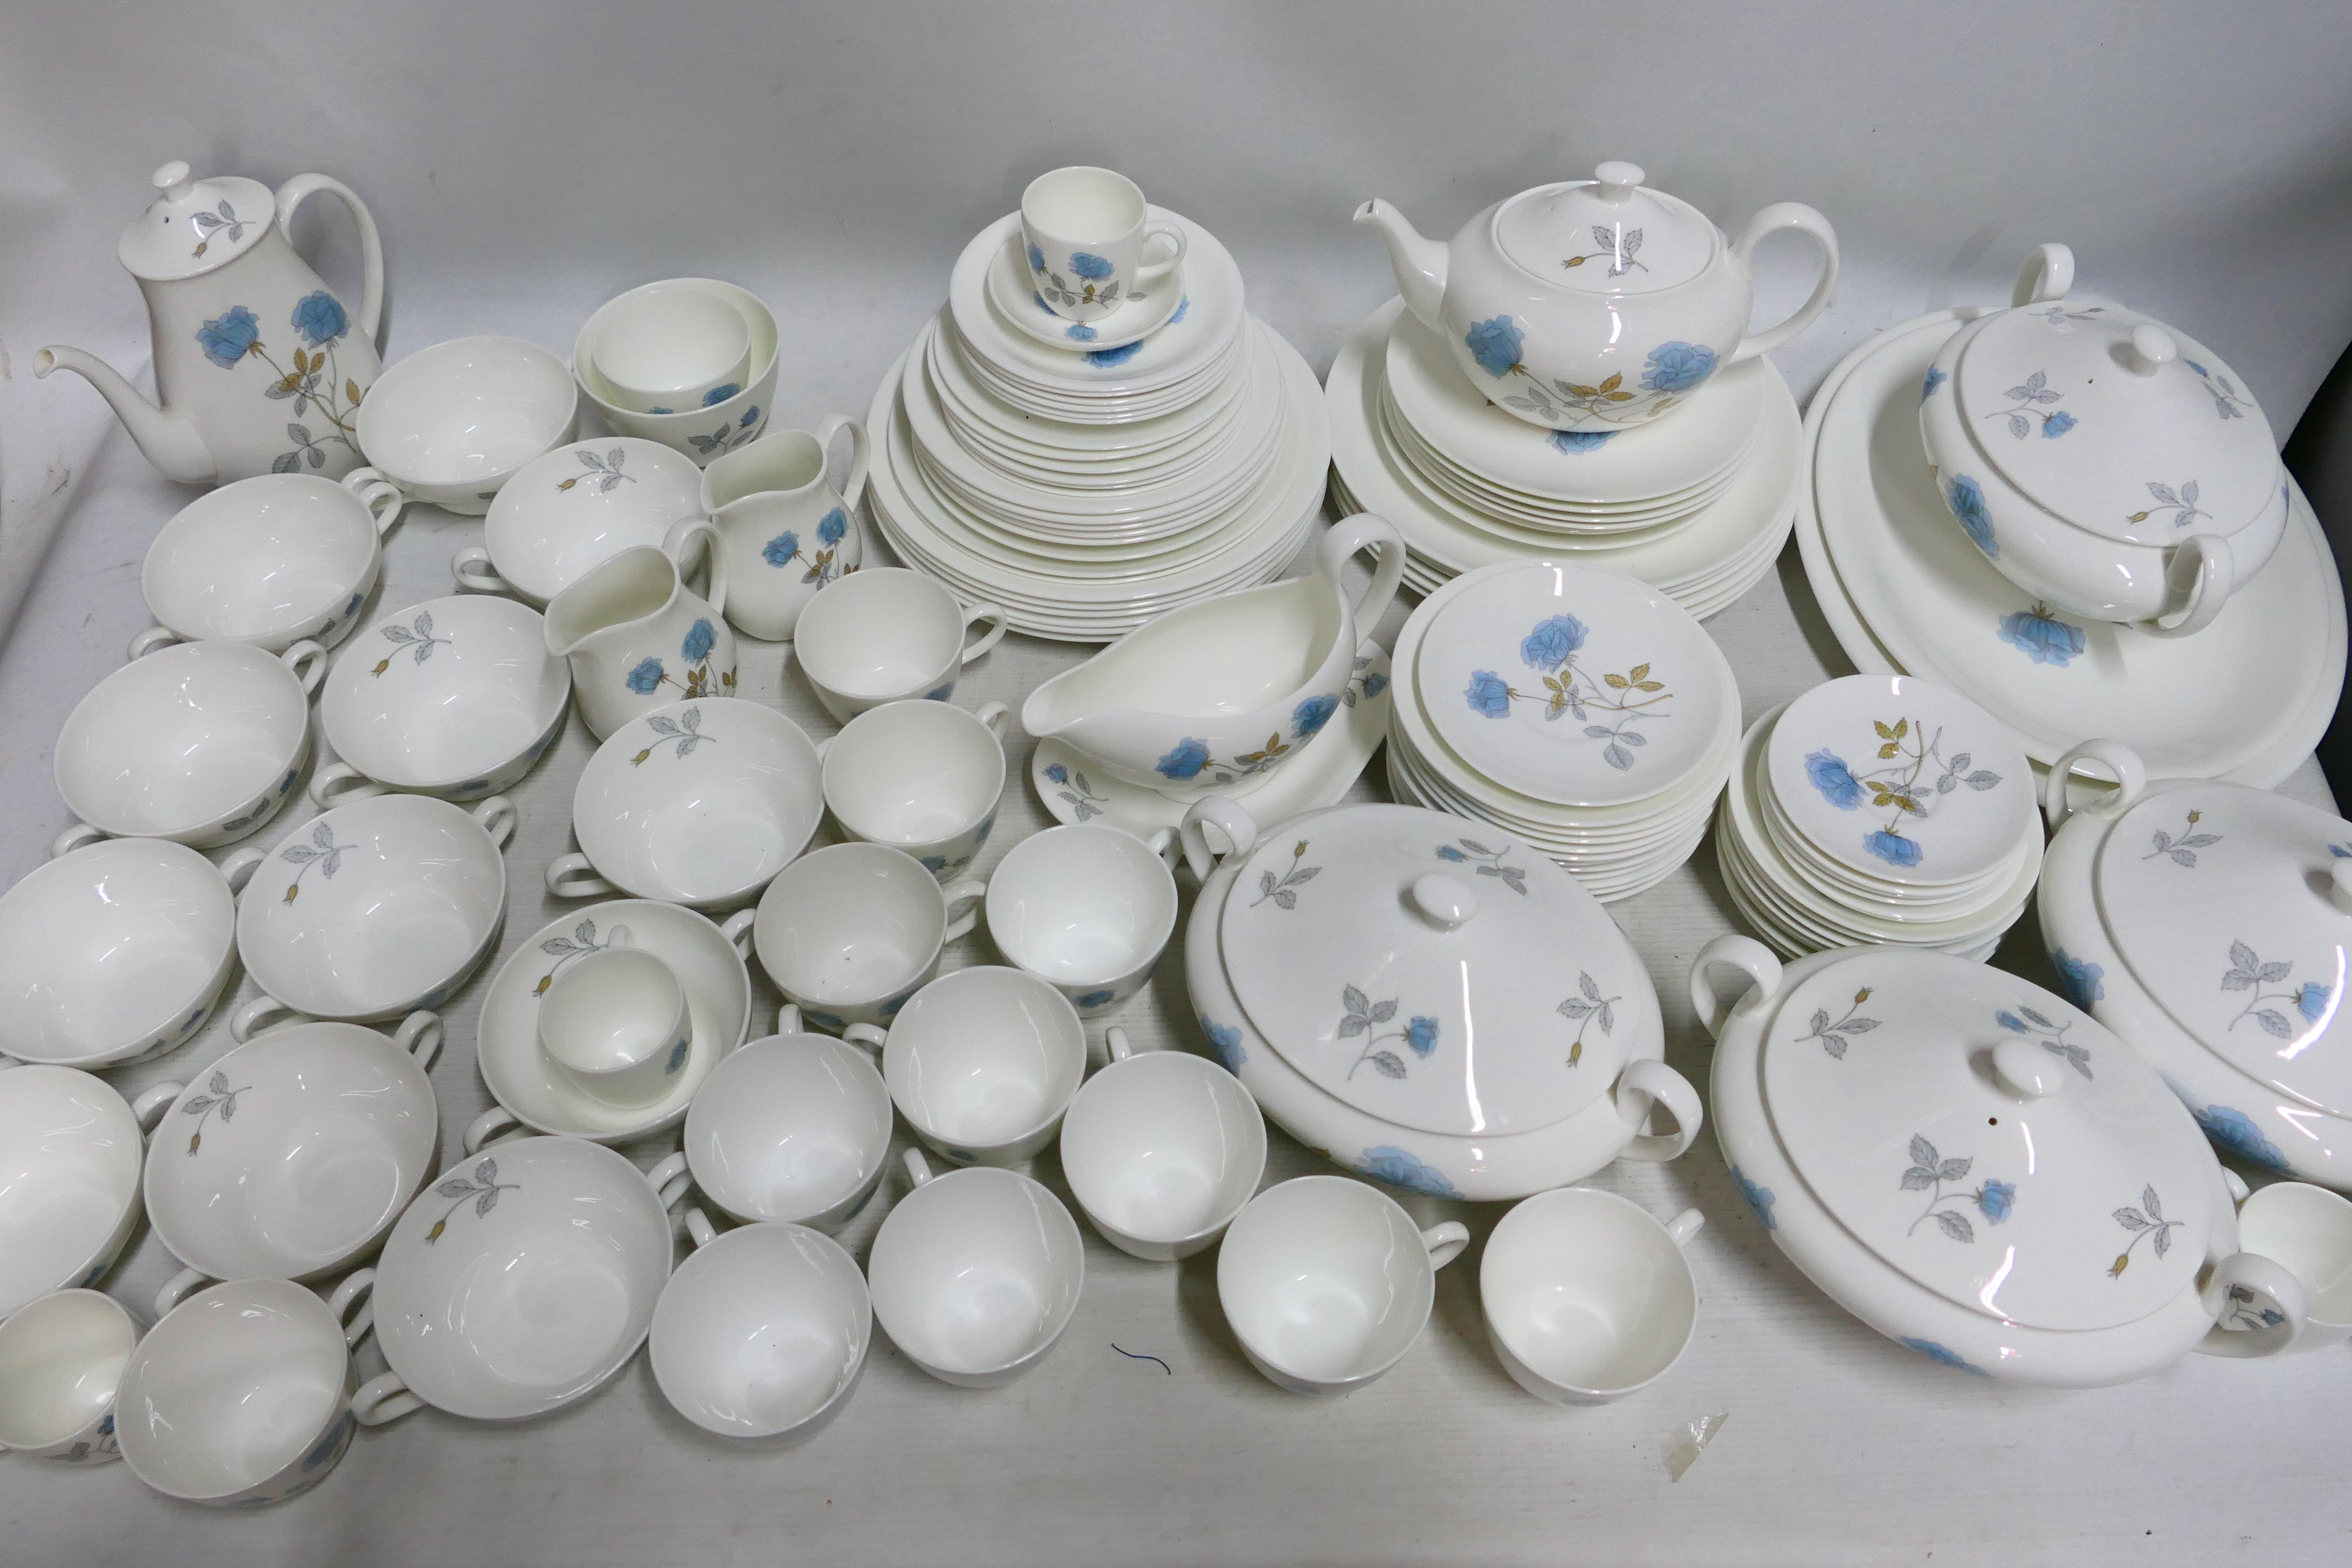 Wedgwood - A large Wedgwood Ice Rose dinner/tea set - Pieces include soup bowls, cream jugs,